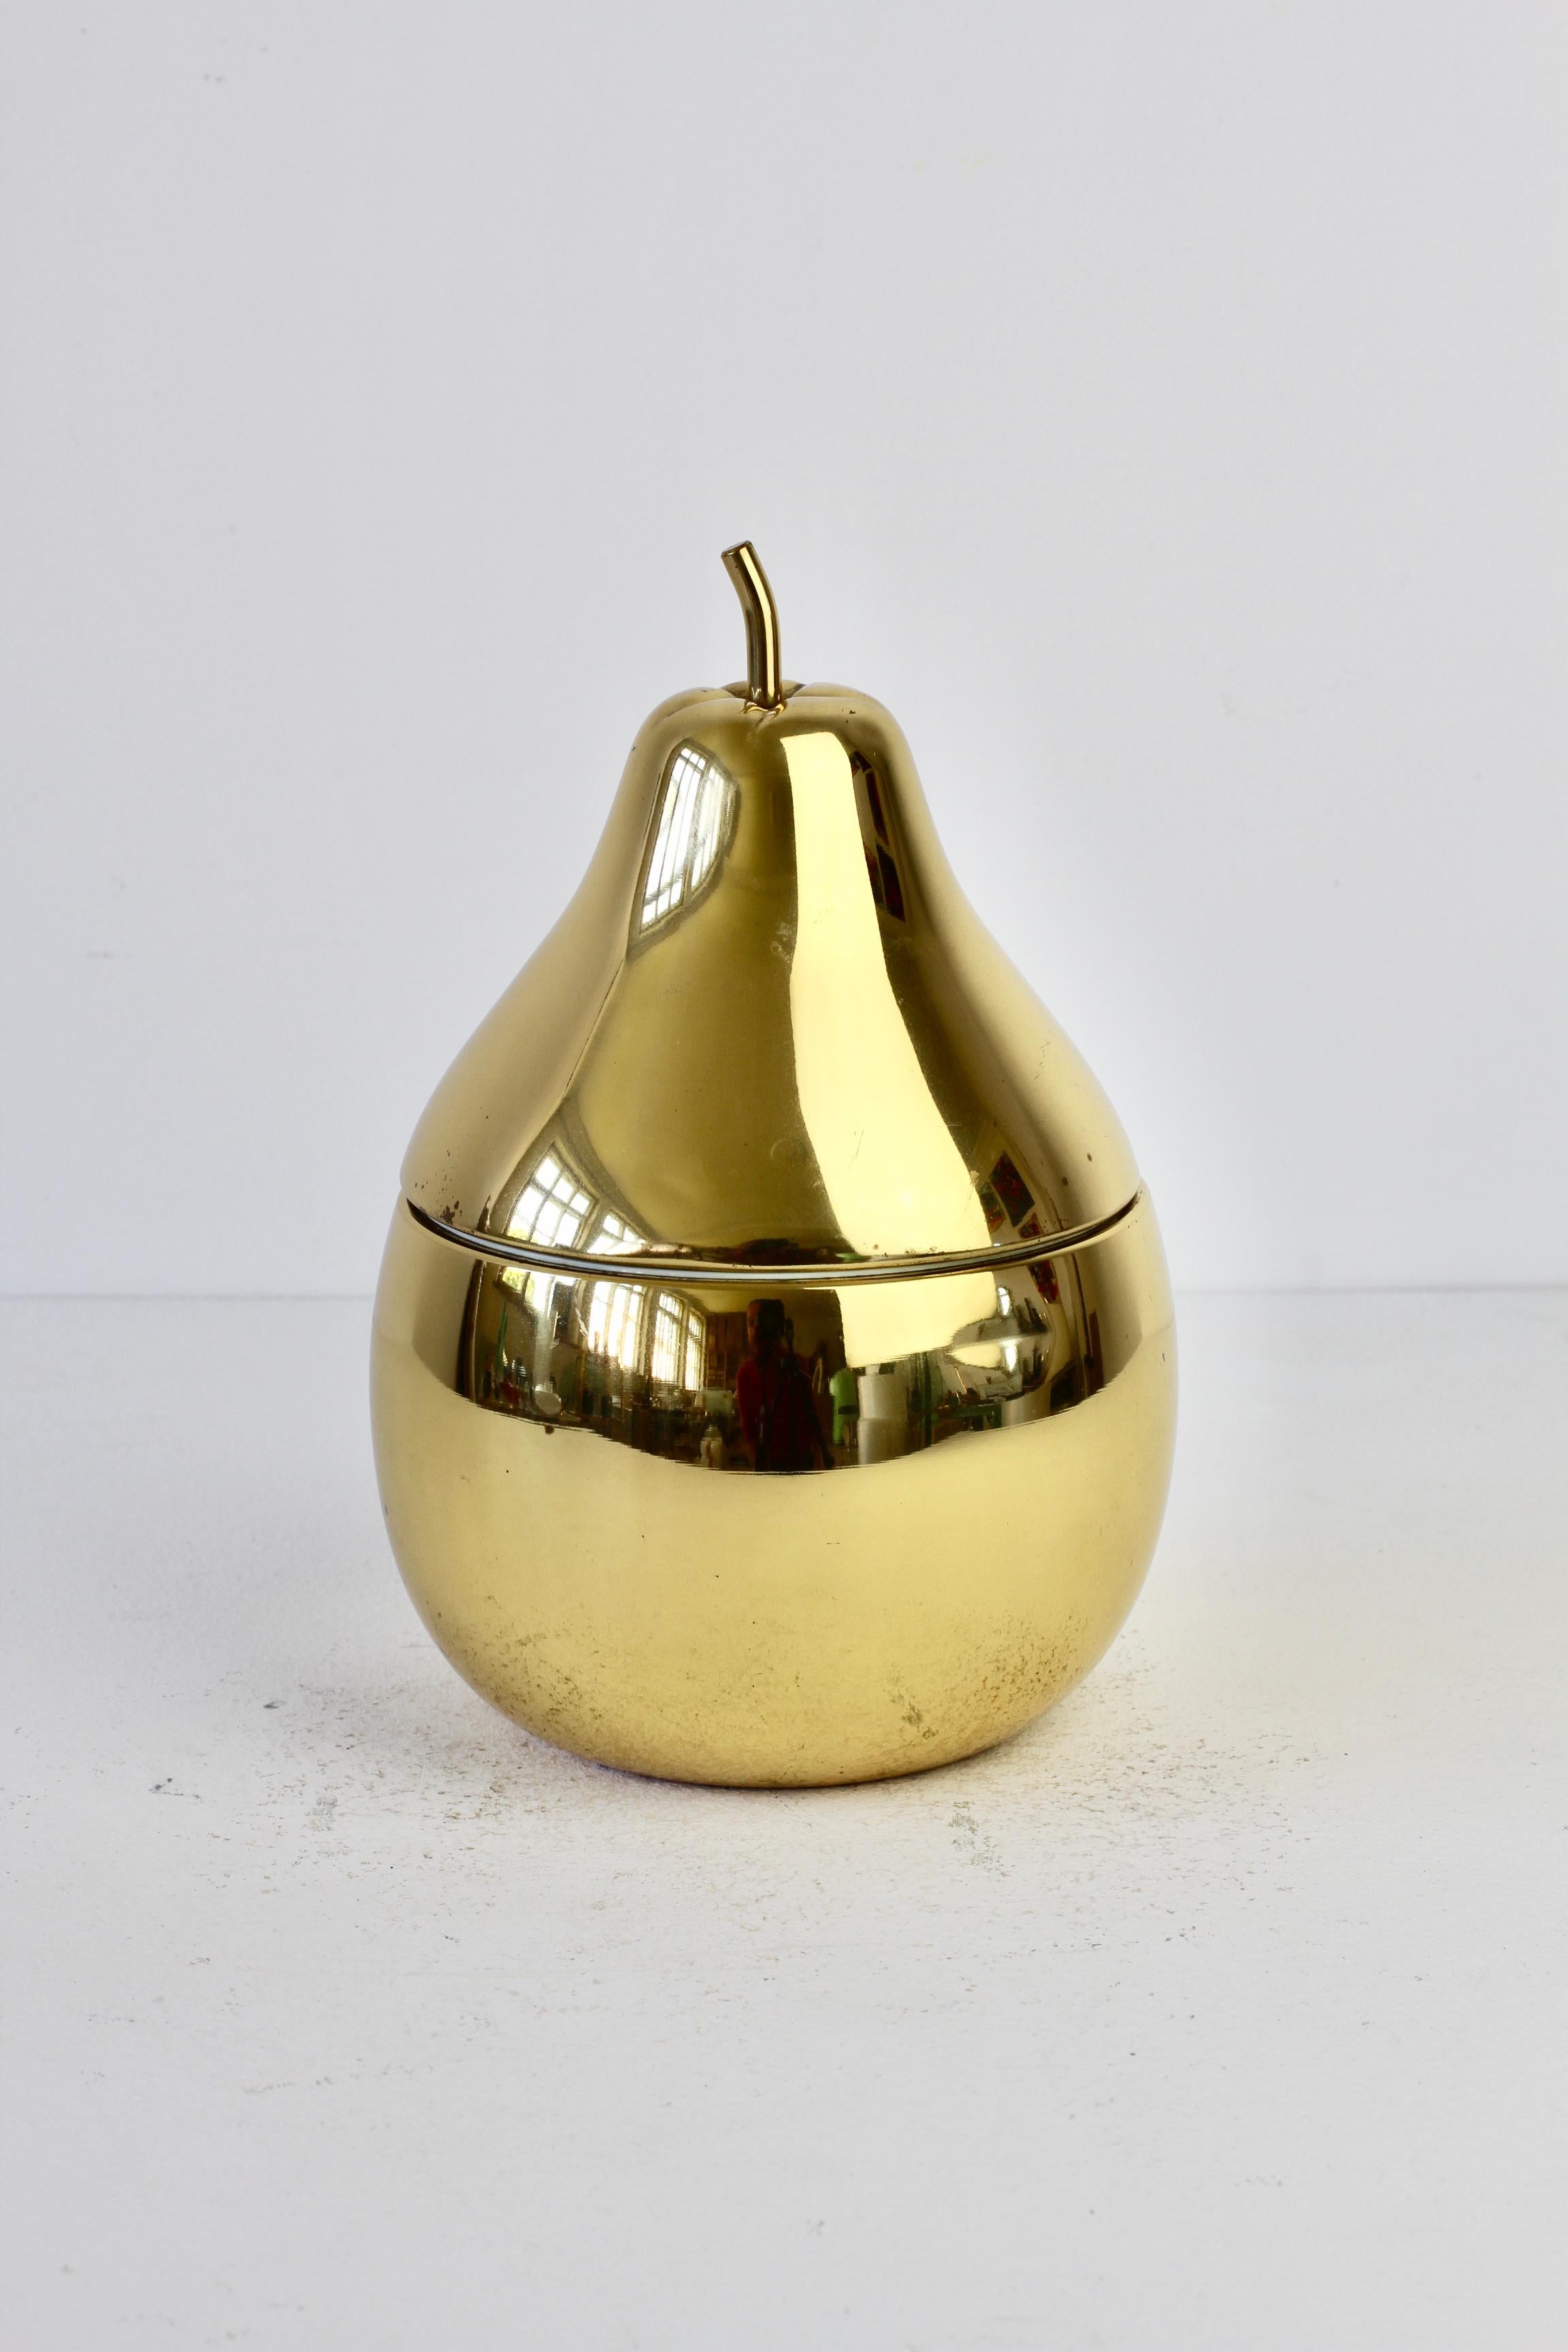 Ettore Sottsass Style Vintage Pear Shaped Brass Ice Cube Bucket or Holder, 1970s In Good Condition For Sale In Landau an der Isar, Bayern